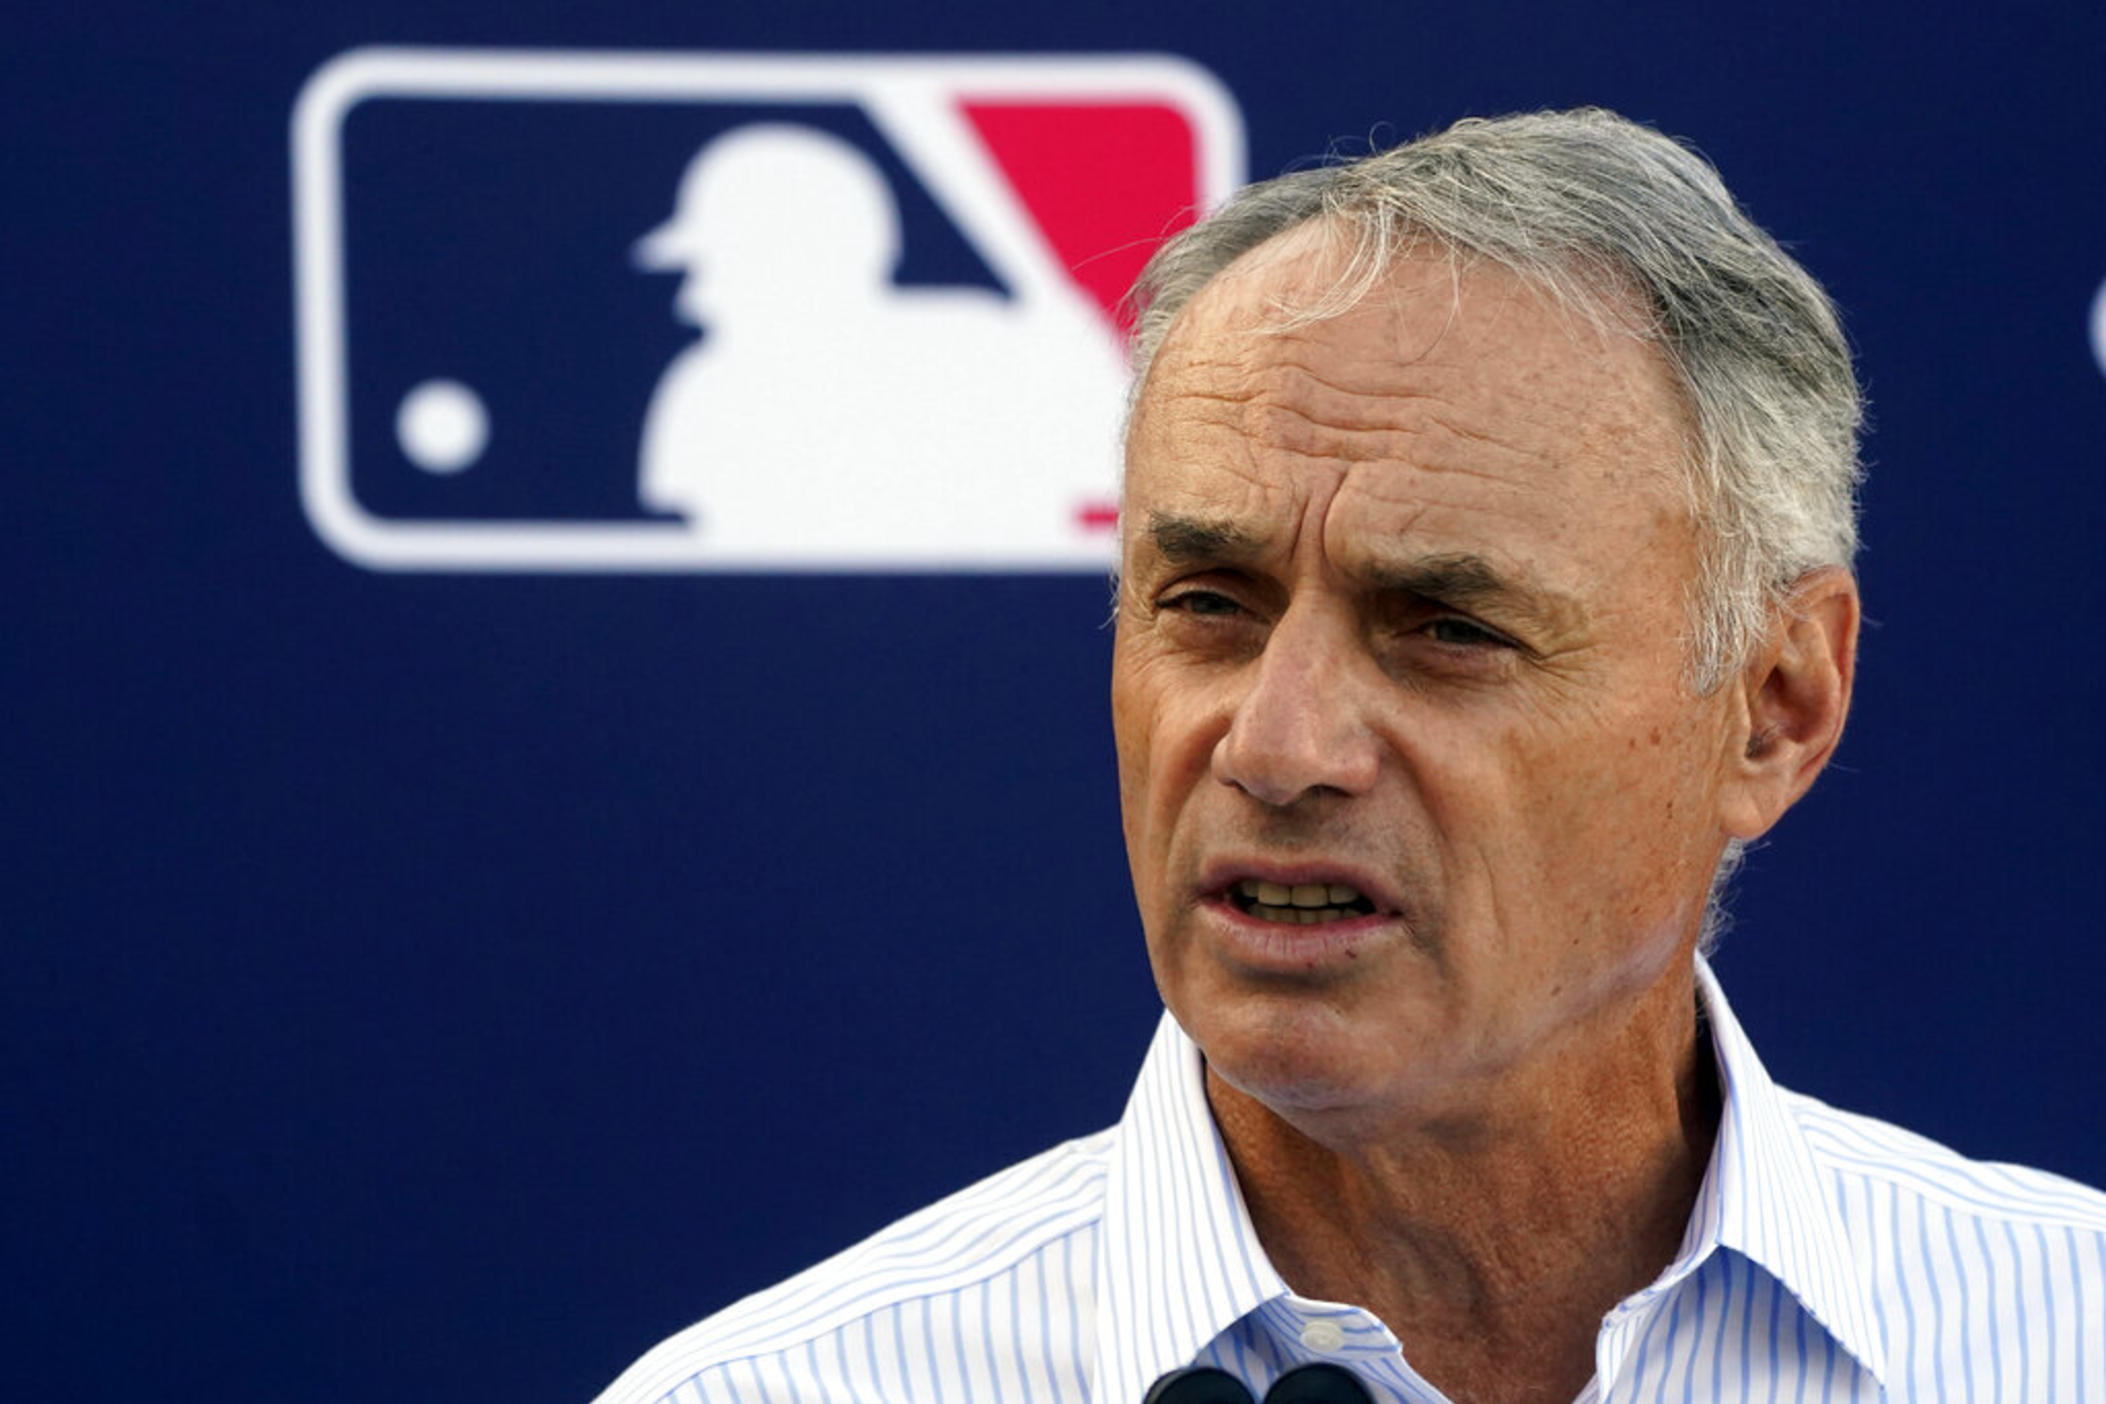 Major League Baseball Commissioner Rob Manfred speaks during a news conference after negotiations with the players' association toward a labor deal, Tuesday, March 1, 2022, at Roger Dean Stadium in Jupiter, Fla. Manfred said he is canceling the first two series of the season that was set to begin March 31, dropping the schedule from 162 games to likely 156 games at most. Manfred said the league and union have not made plans for future negotiations. Players won't be paid for missed games. 